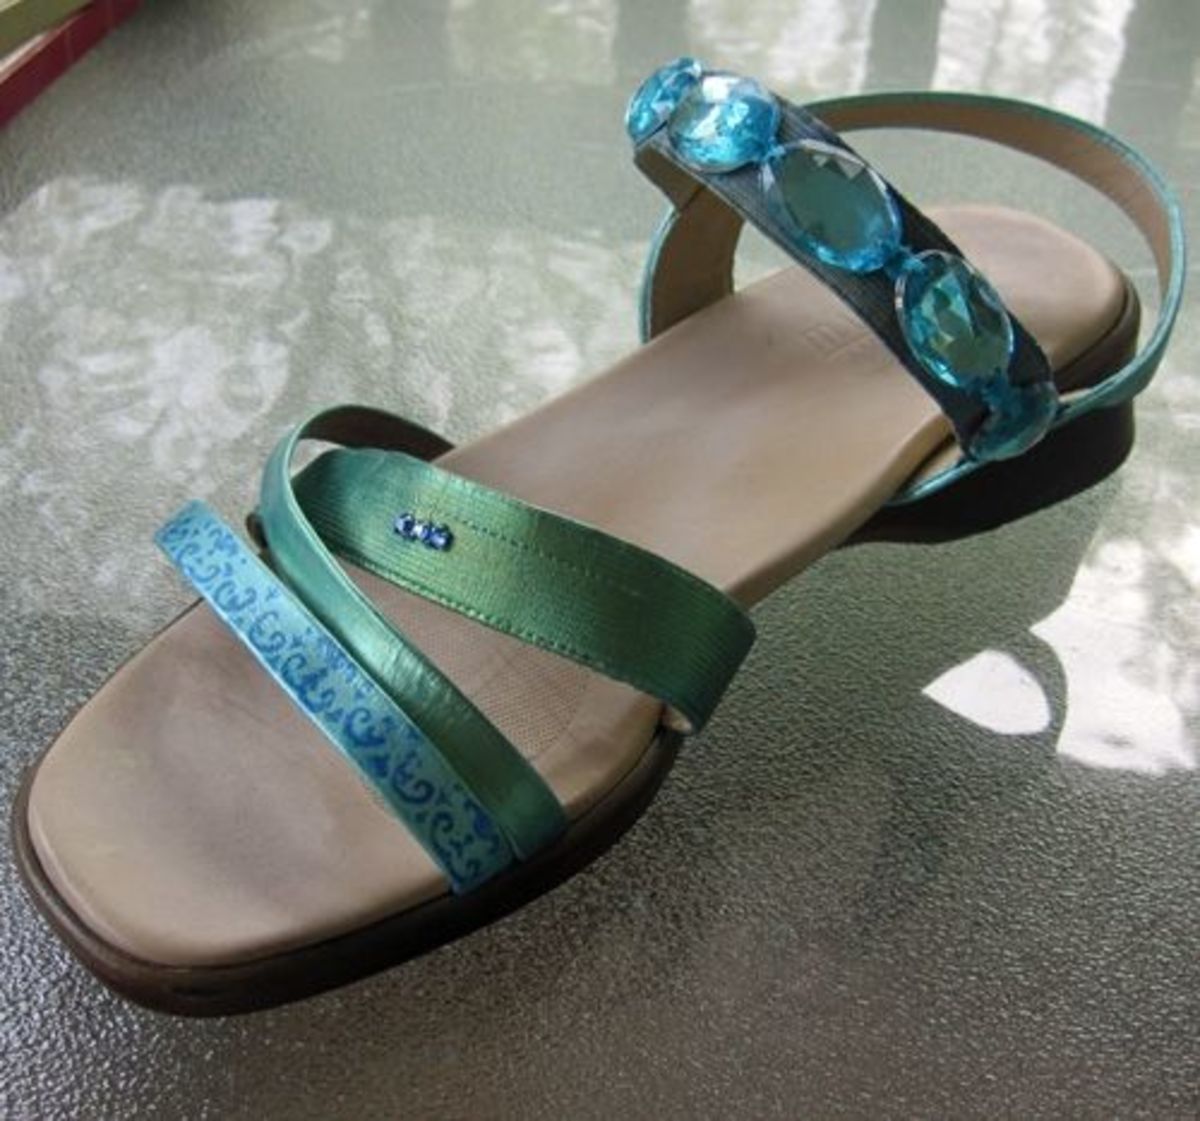 Aqua faux jewels sewn onto the stretched-out elastic strap. 